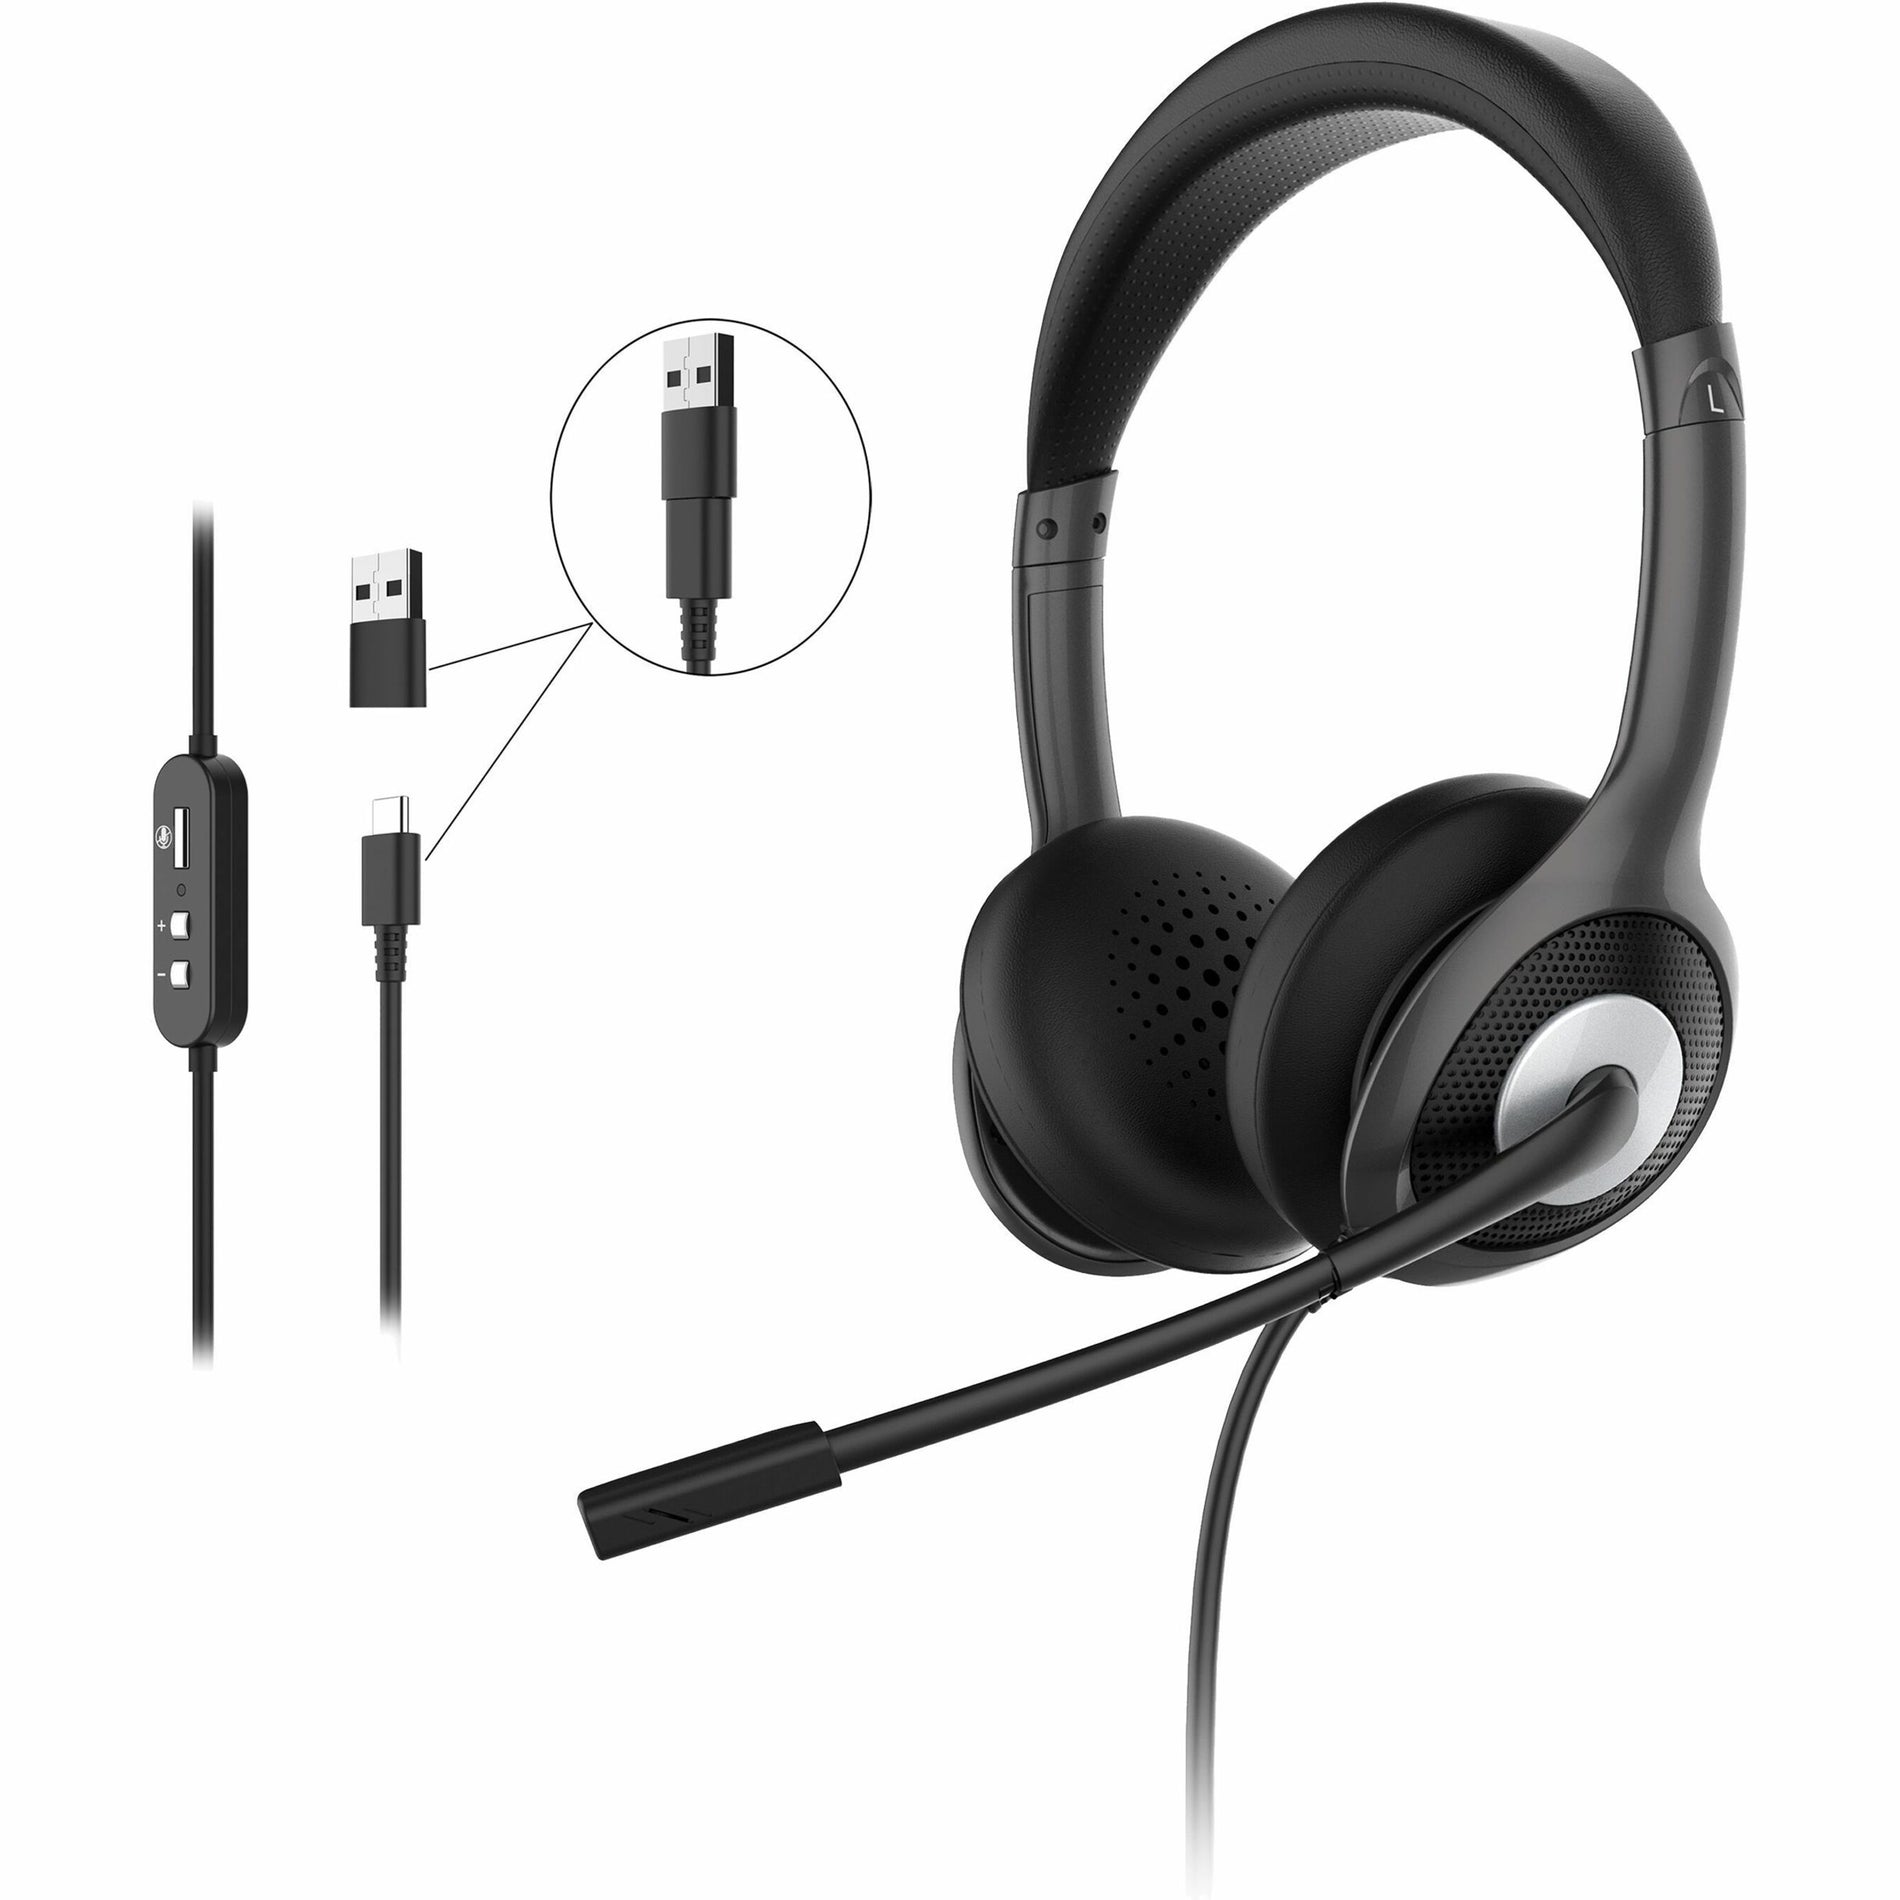 Morpheus 360 HS5600SU USB Stereo Headset with Boom Microphone, Comfortable, Plug and Play, Rotating Microphone, Microphone Mute, In-Line Volume Control, Lightweight